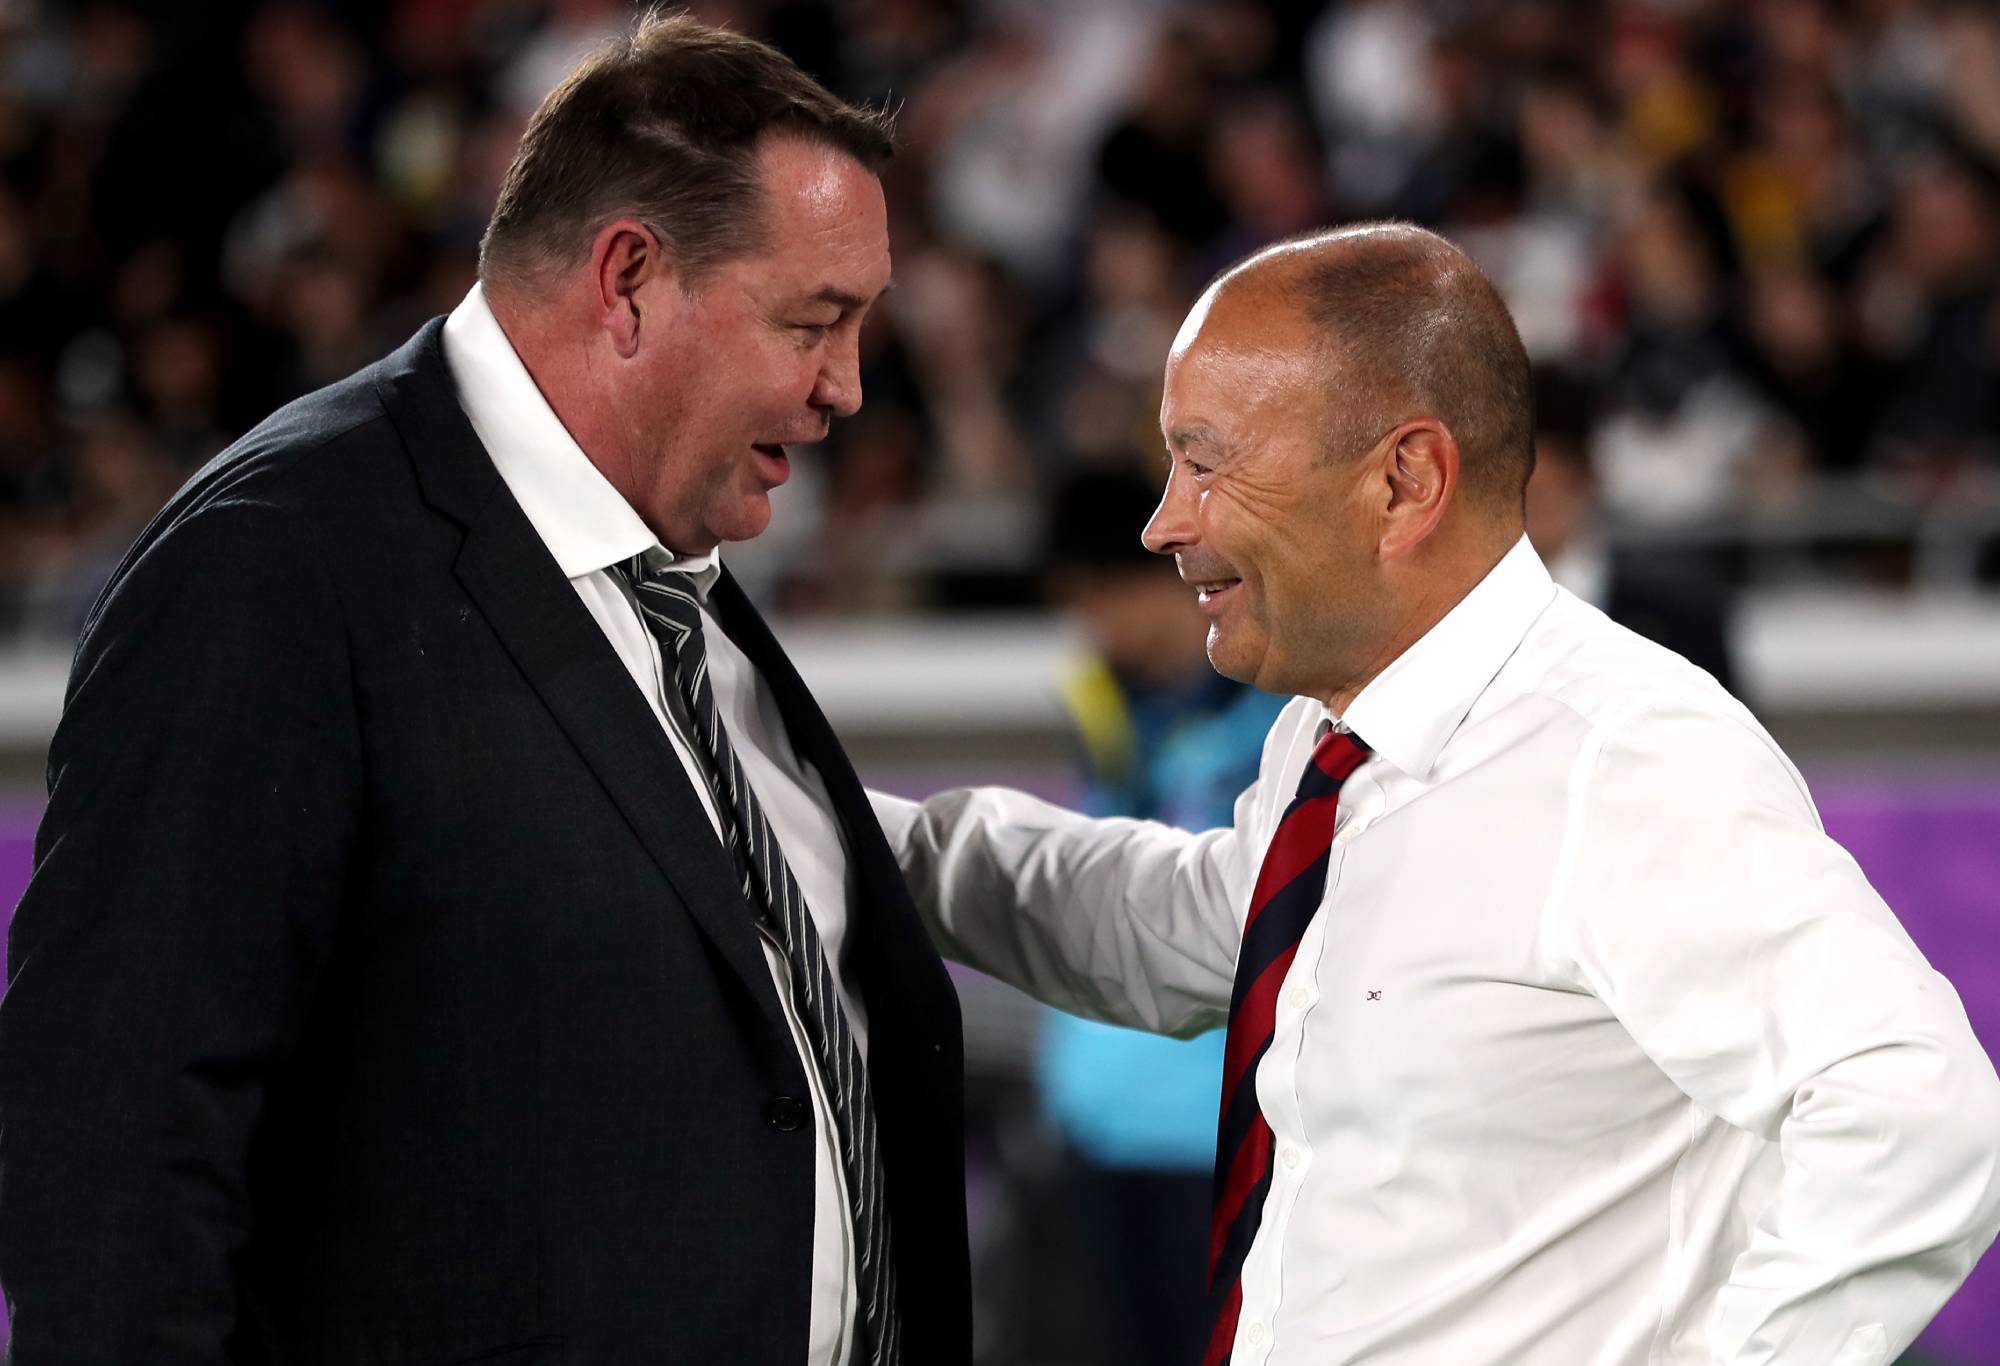 England coach Eddie Jones (left) and New Zealand coach Steve Hansen on the pitch after the 2019 Rugby World Cup Semi Final match at International Stadium Yokohama. (Photo by David Davies/PA Images via Getty Images)